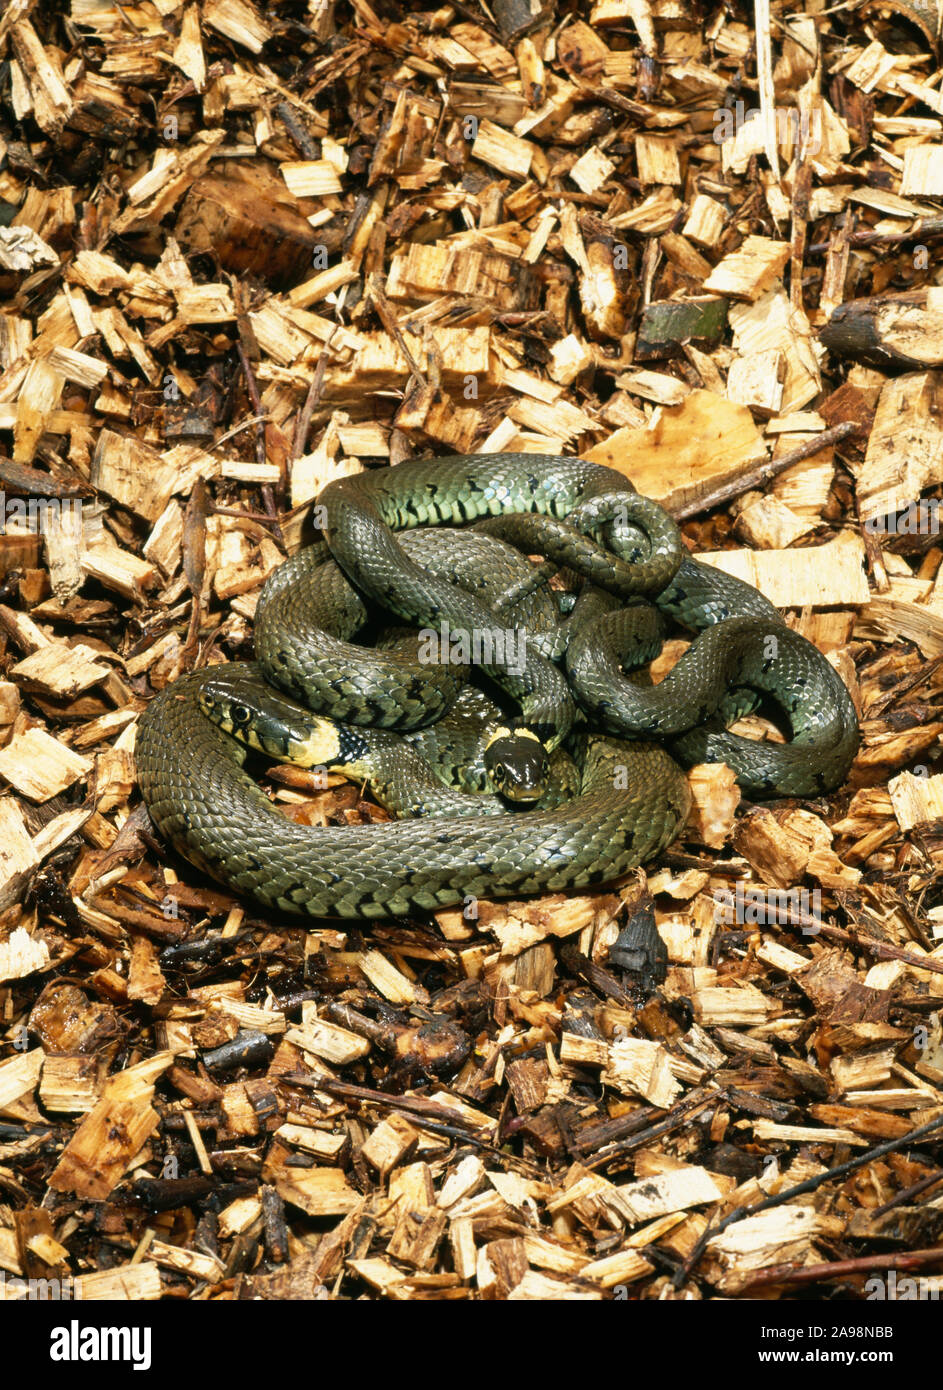 GRASS SNAKES pairing on warm  (Natrix natrix helvetica) woodchip pile  Norfolk, UK.  Female is the larger of the two. Stock Photo